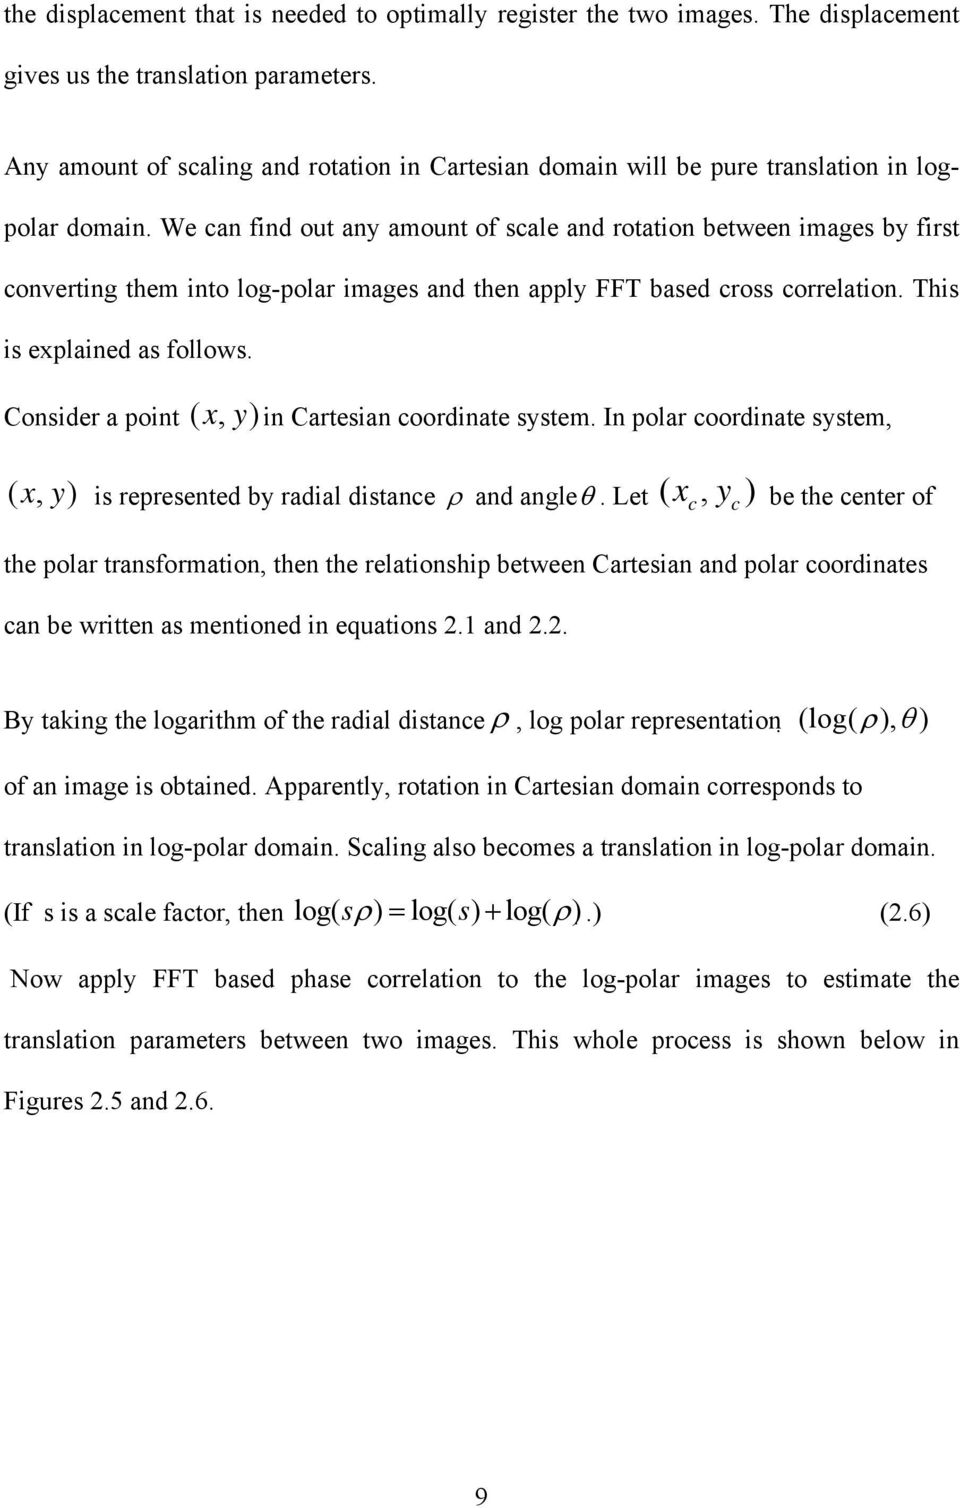 We can find out any amount of scale and rotation between images by first converting them into log-polar images and then apply FFT based cross correlation. This is explained as follows.